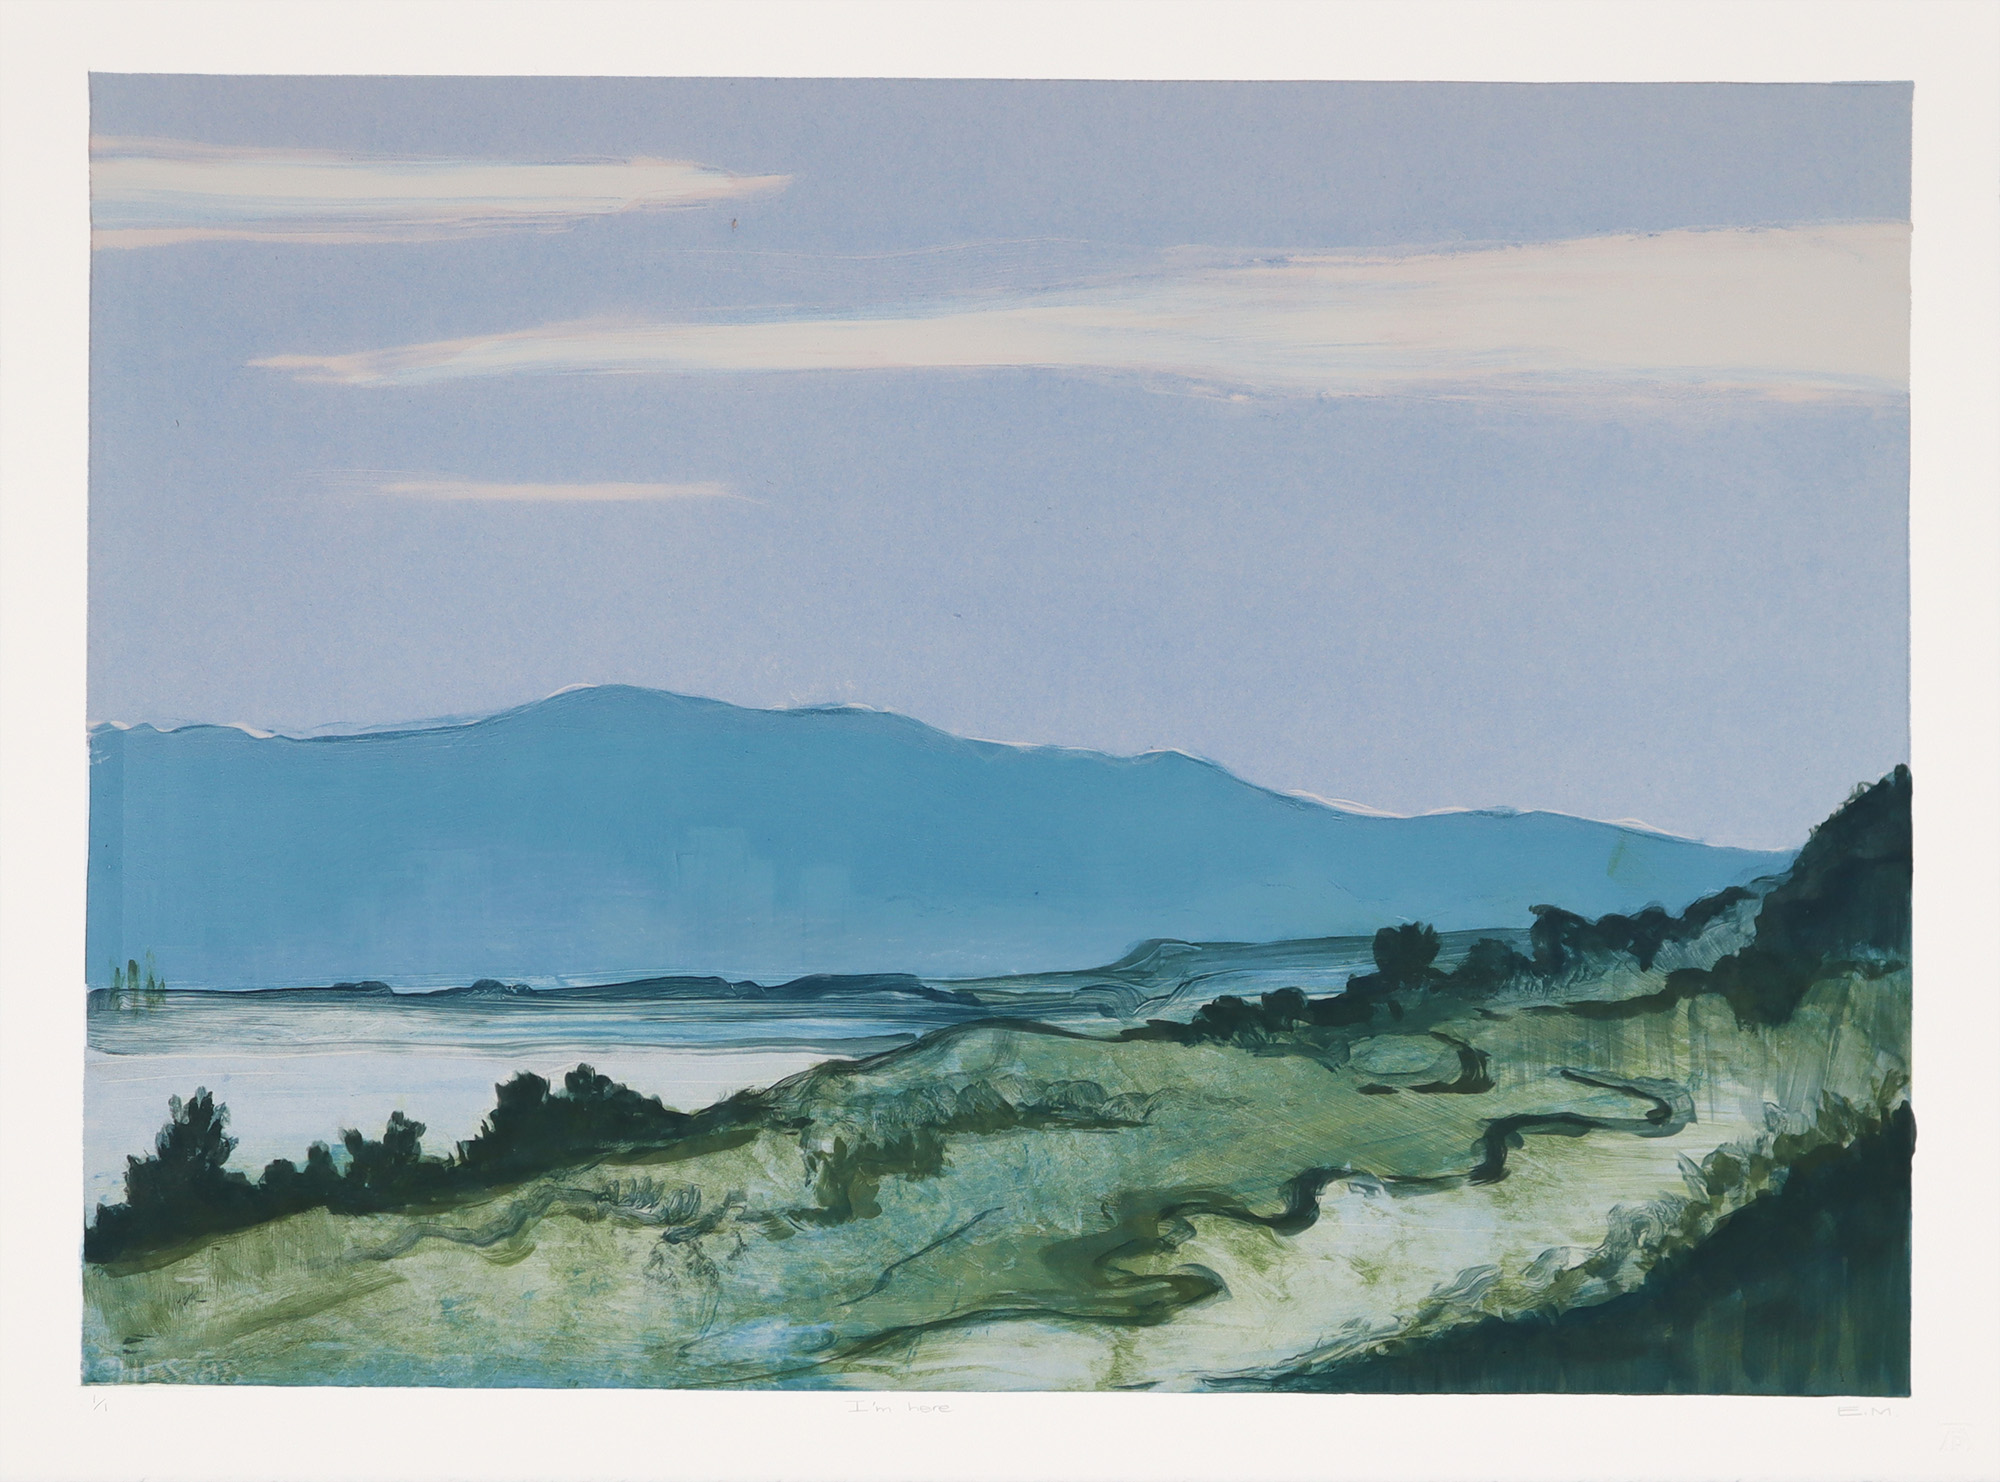 Eugenie Marais I'm Here monotype print landscape south african mountains and water